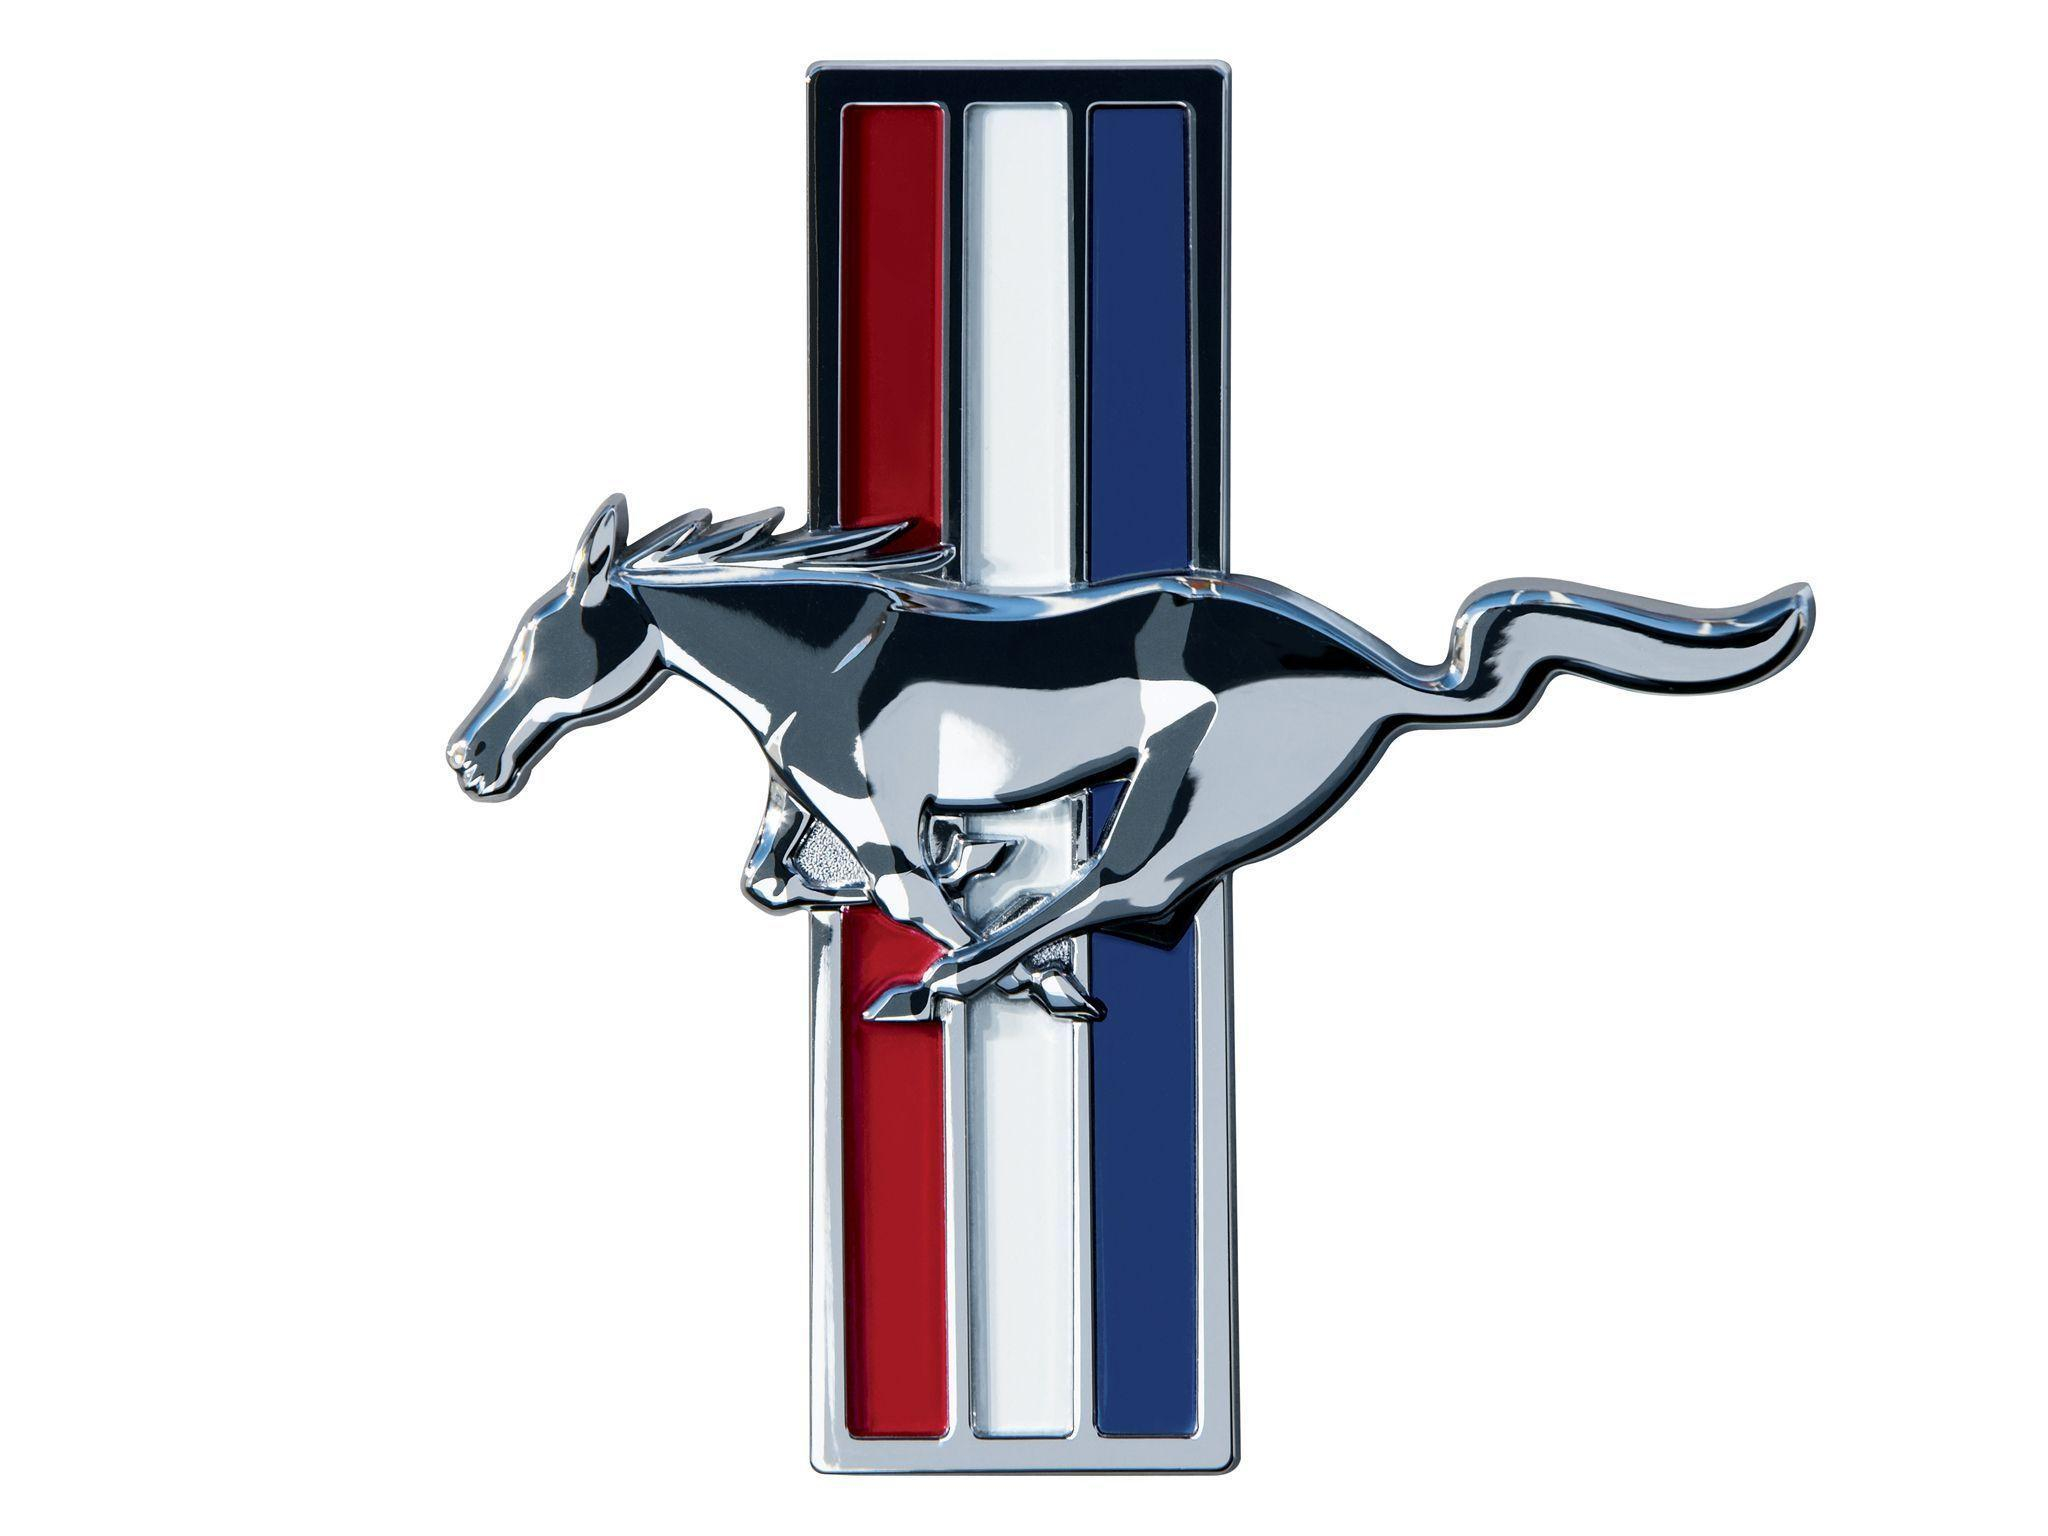 2048x1536 Ford Mustang Logo Wallpapers